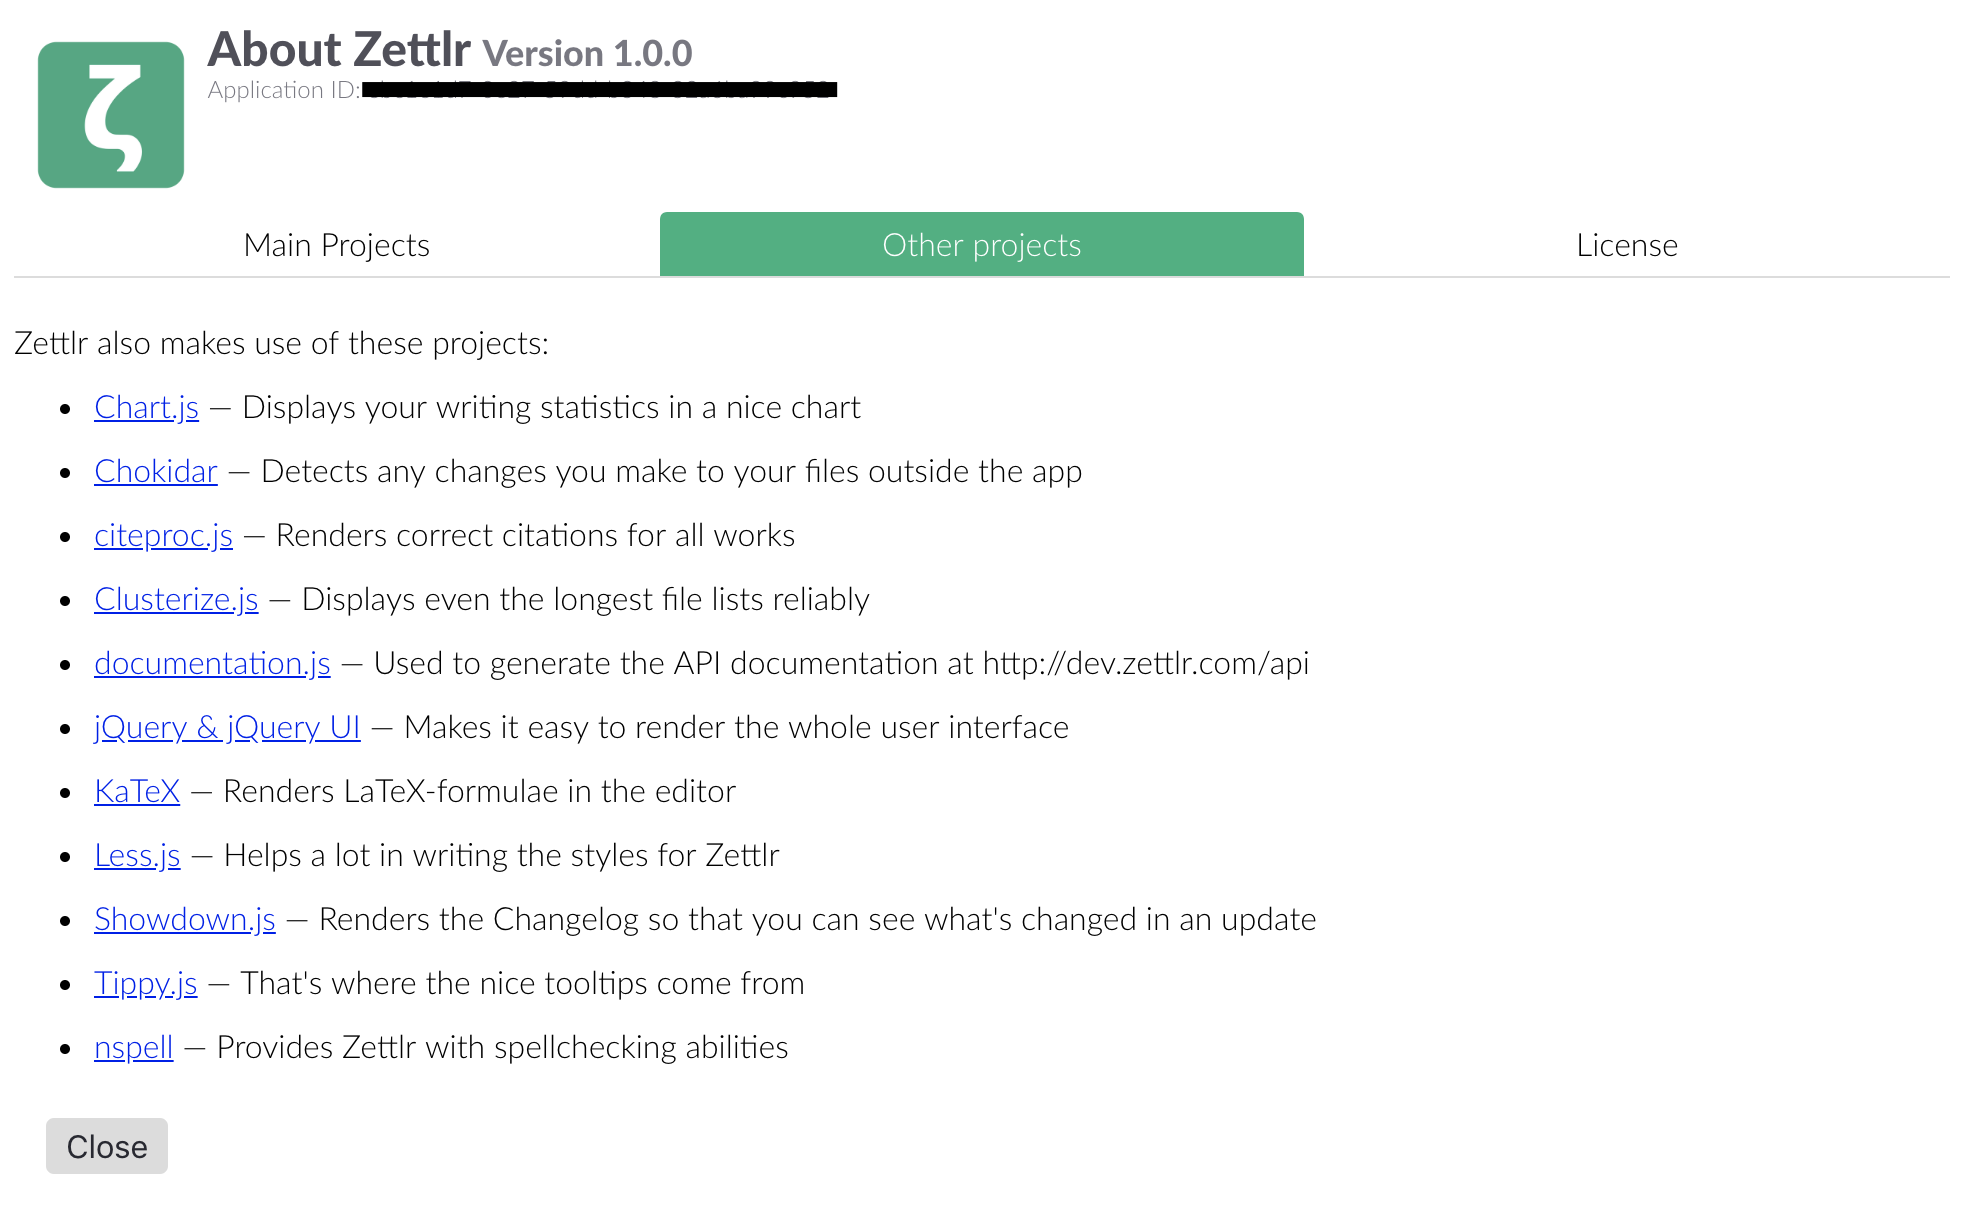 The "Other Projects" tab of the Zettlr about dialog